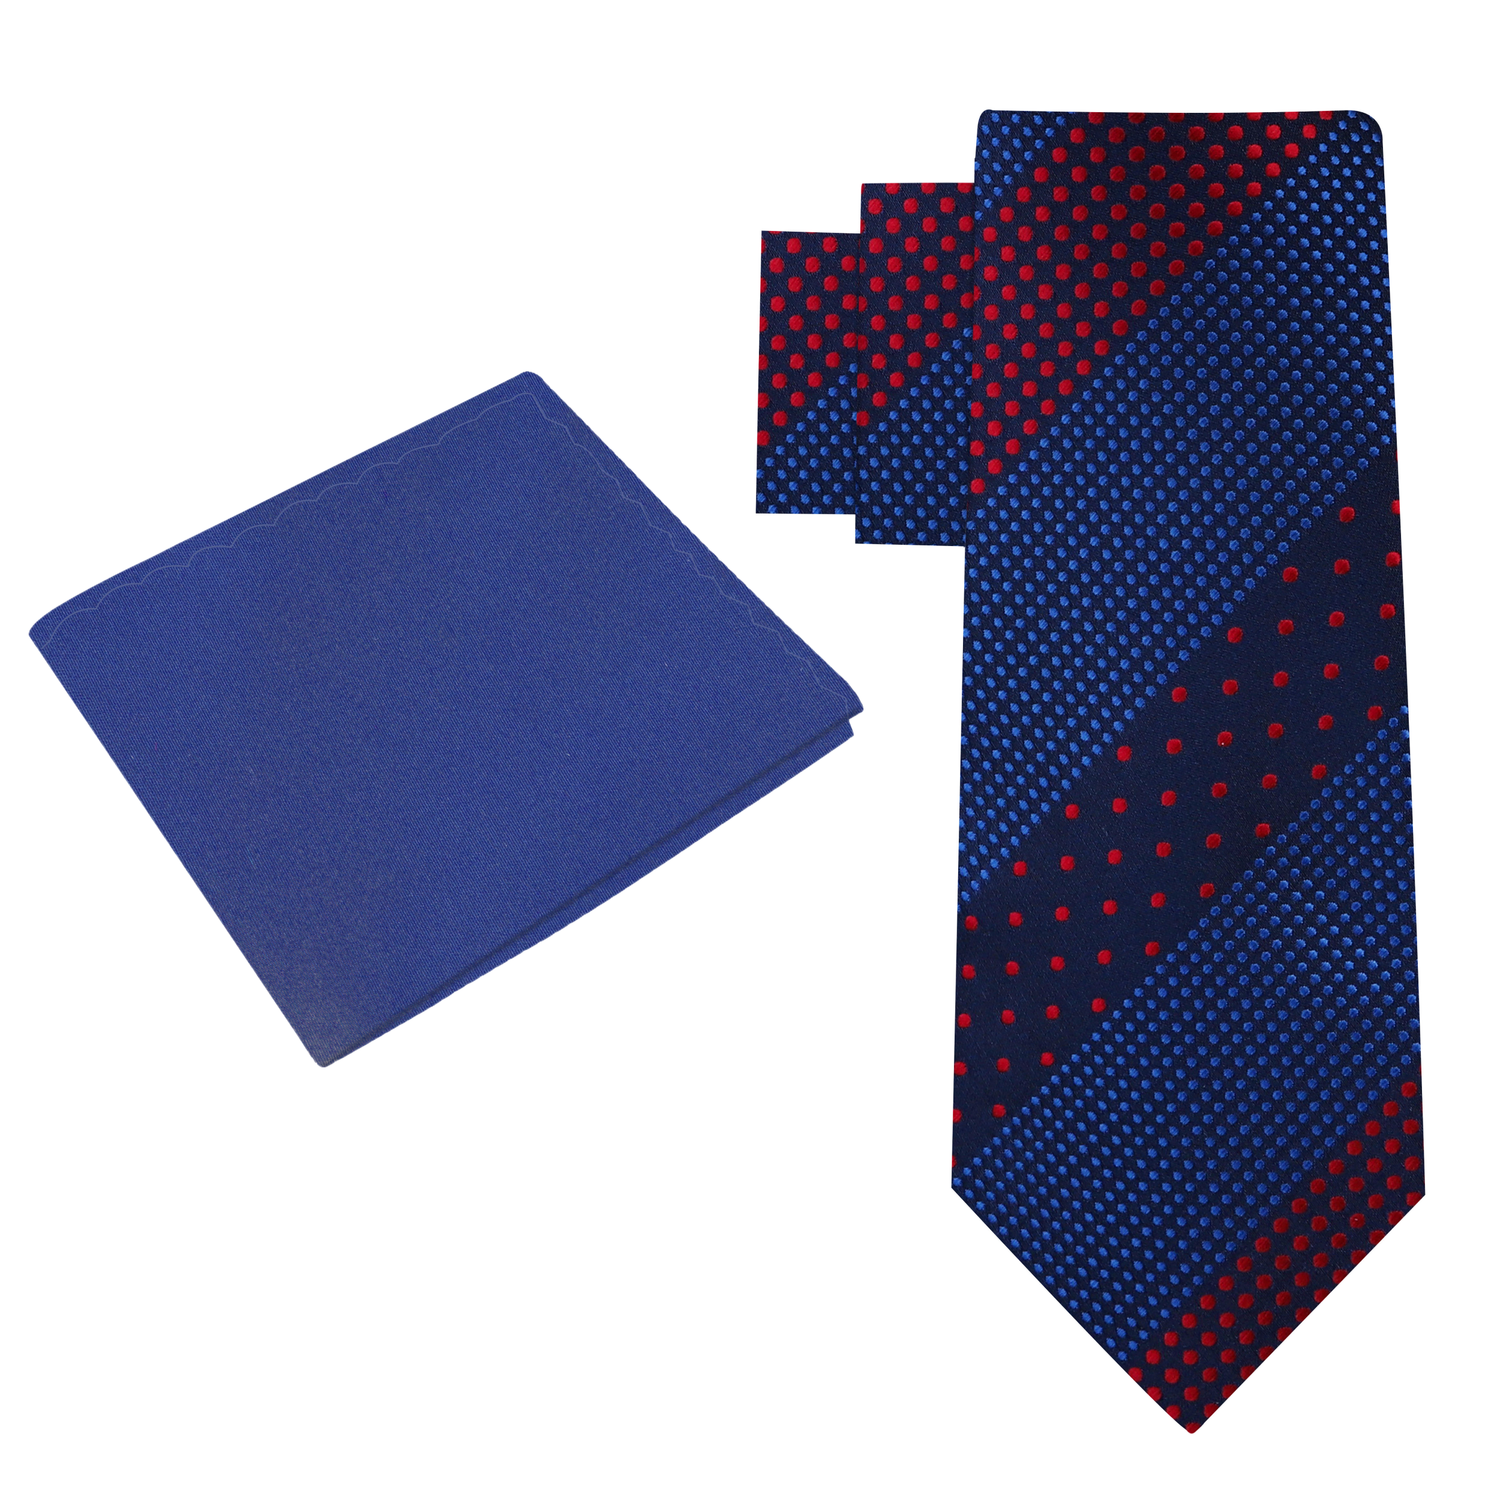 Alt View: Blue, Red Polka Tie and Blue Square